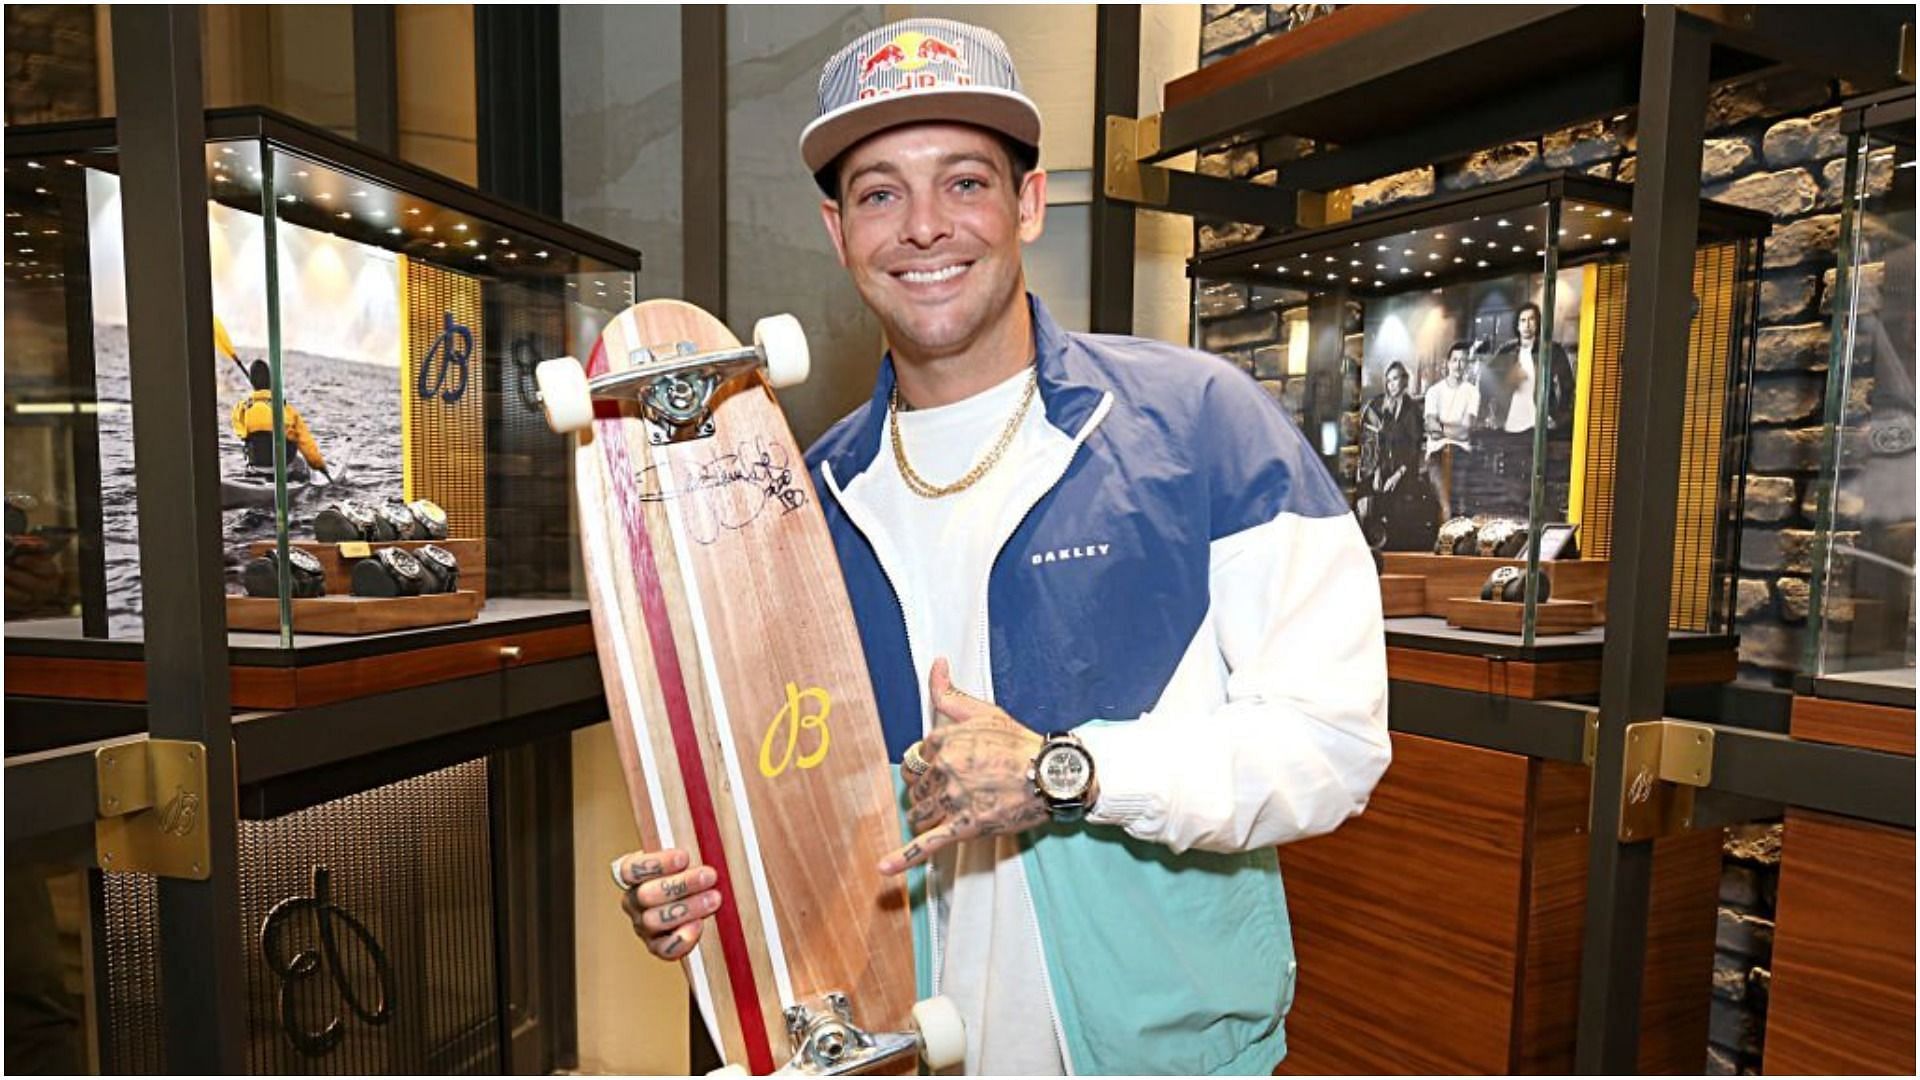 yan Sheckler attends the Breitling Boutique San Diego grand opening celebration (Image via Phillip Faraone/Getty Images)